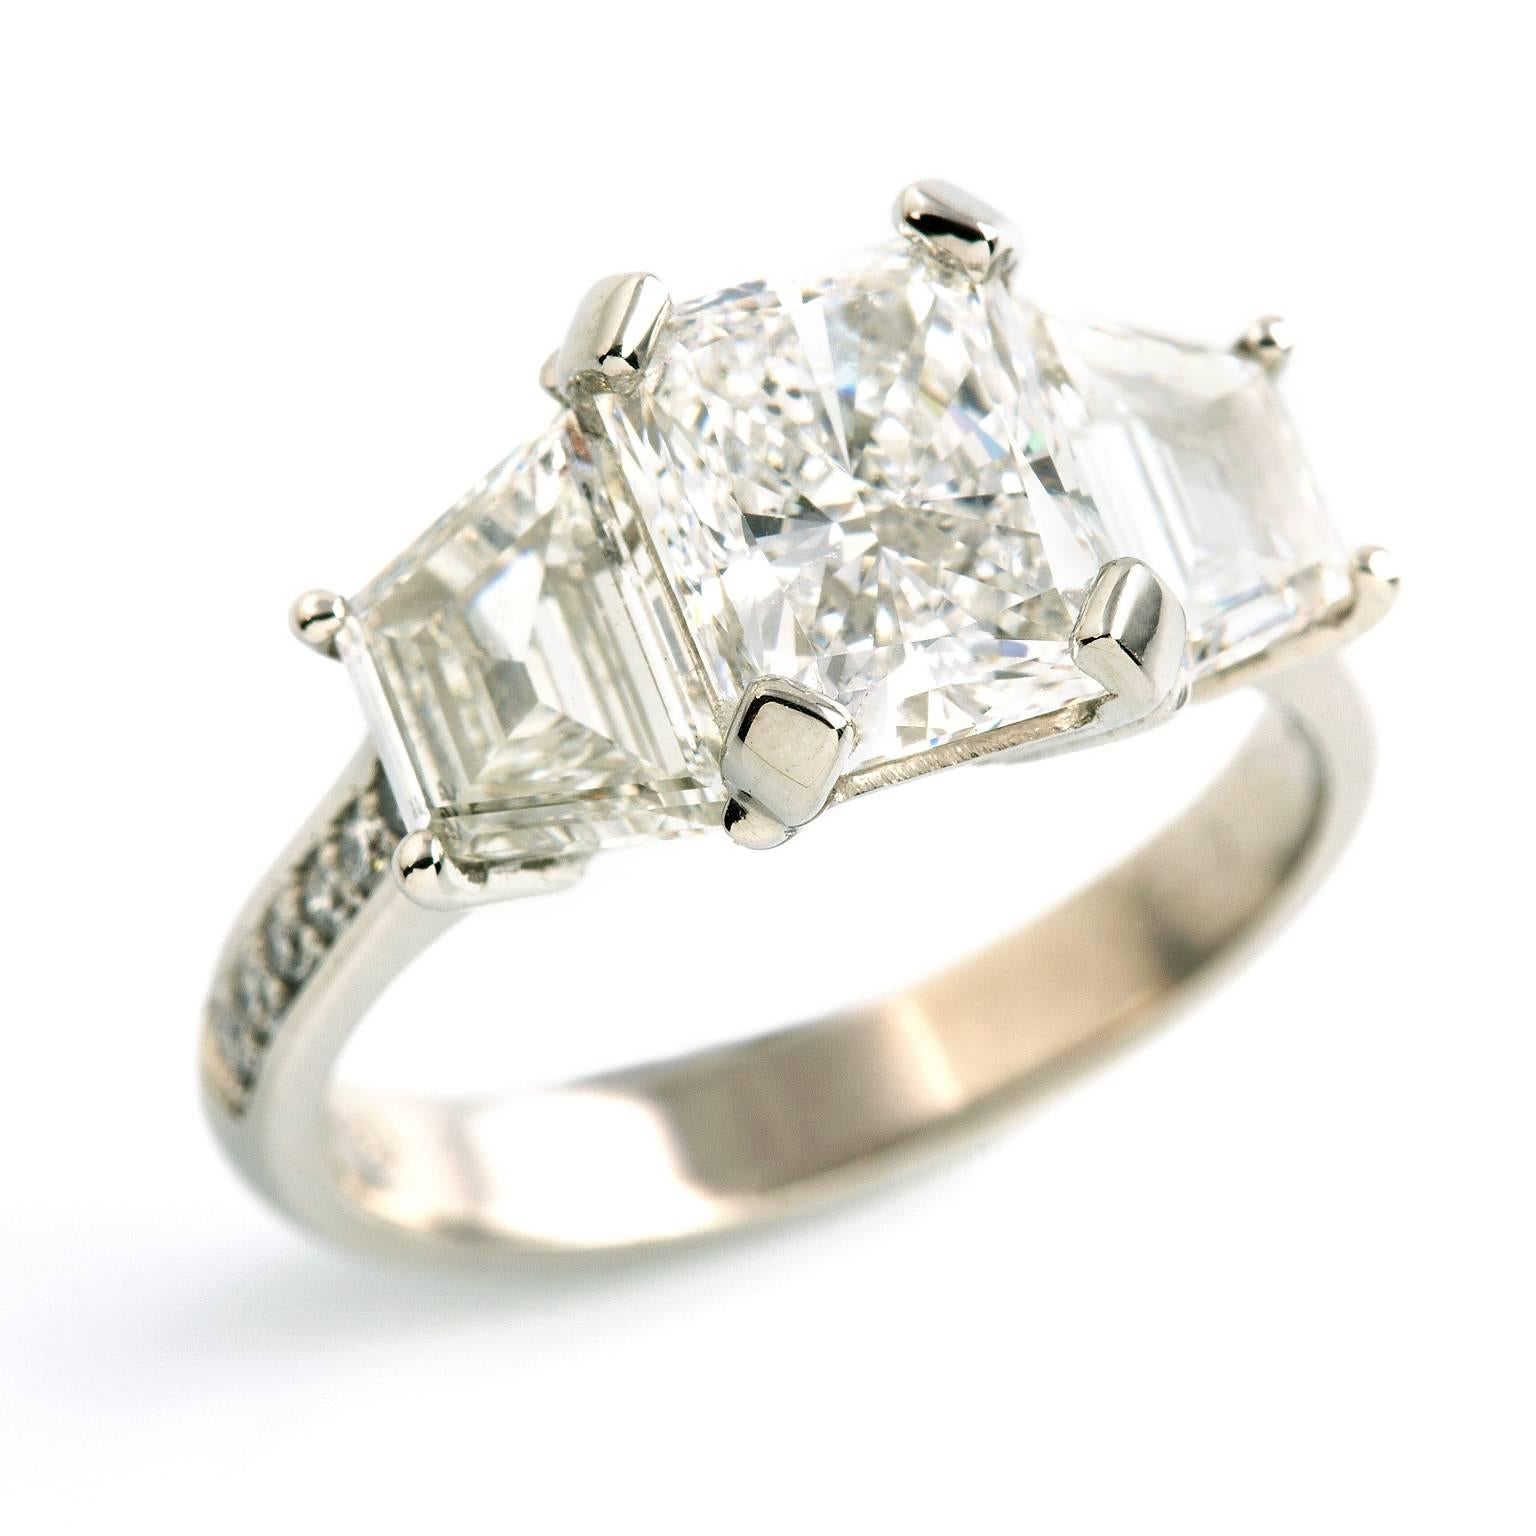 Platinum Diamond Ring

This breathtaking beauty is set with three of the finest quality diamonds. The platinum band is further bead set with twelve petite diamonds of similar fine quality.

Corner rectangular modified brilliant cut: GIA certified, D